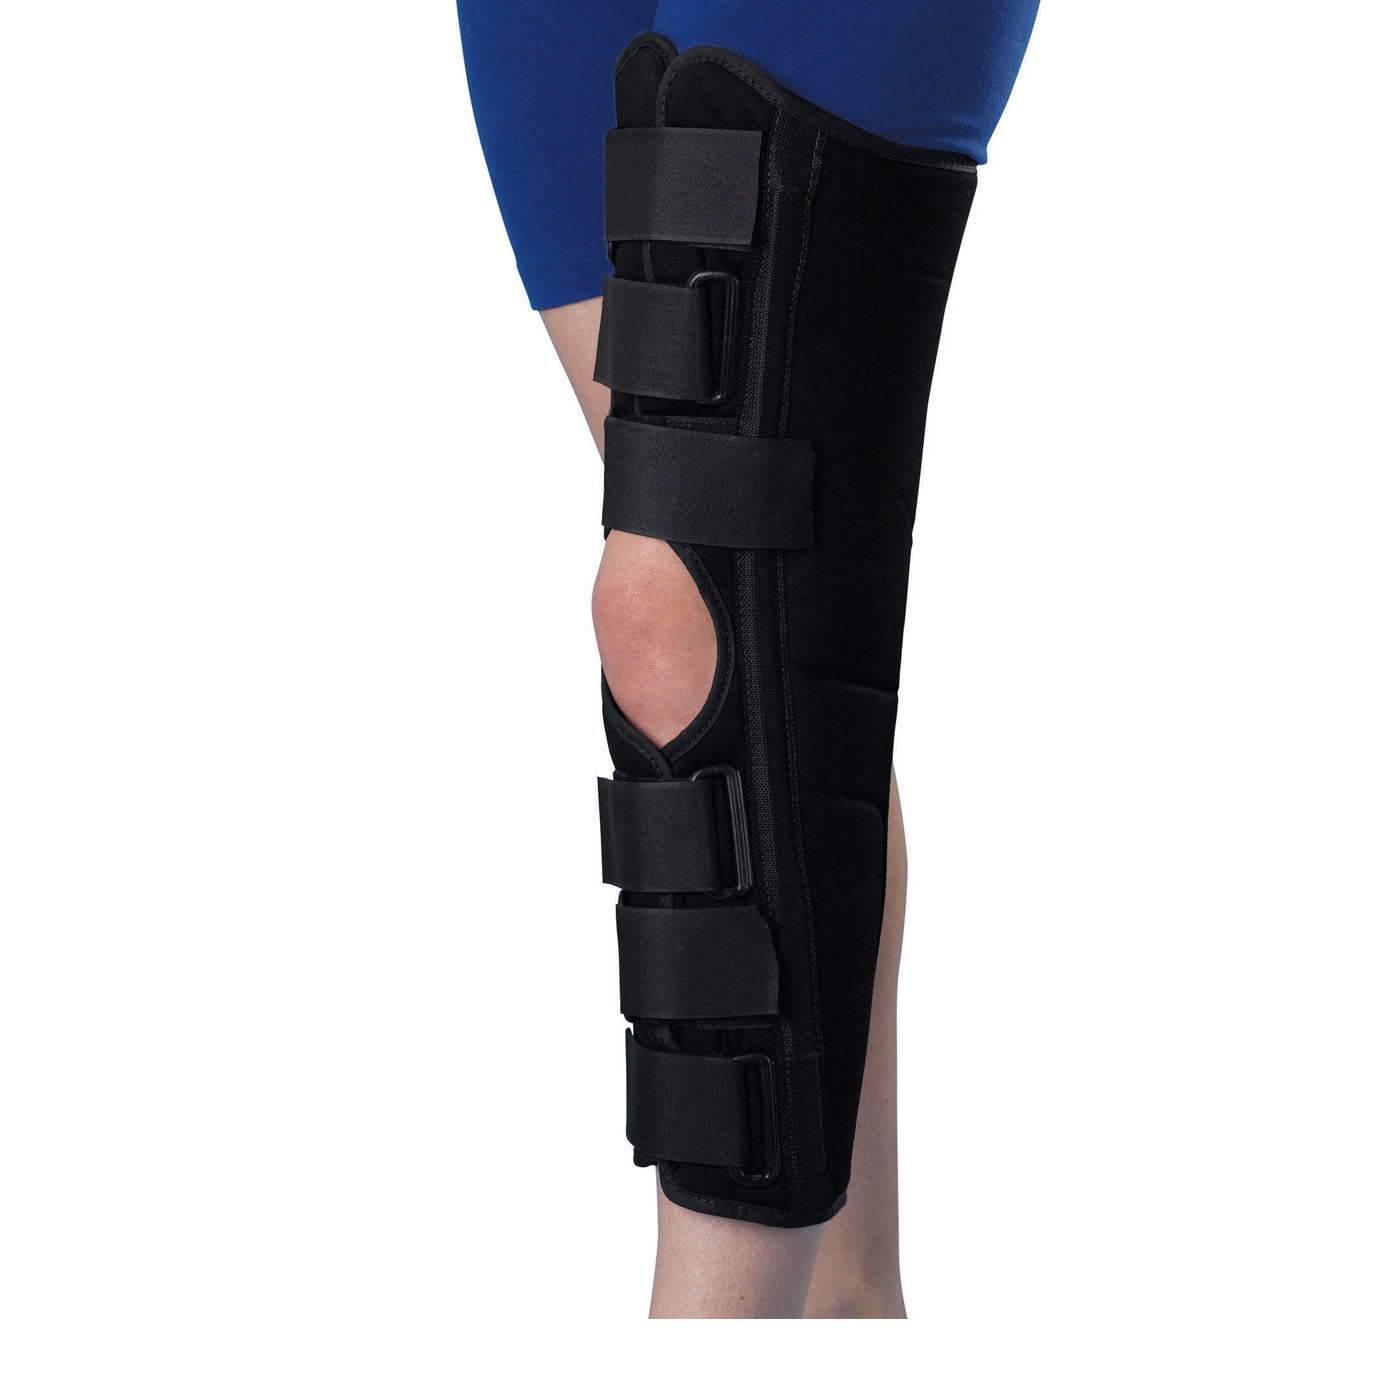 Immobilizer Knee 24 Deluxe  LG